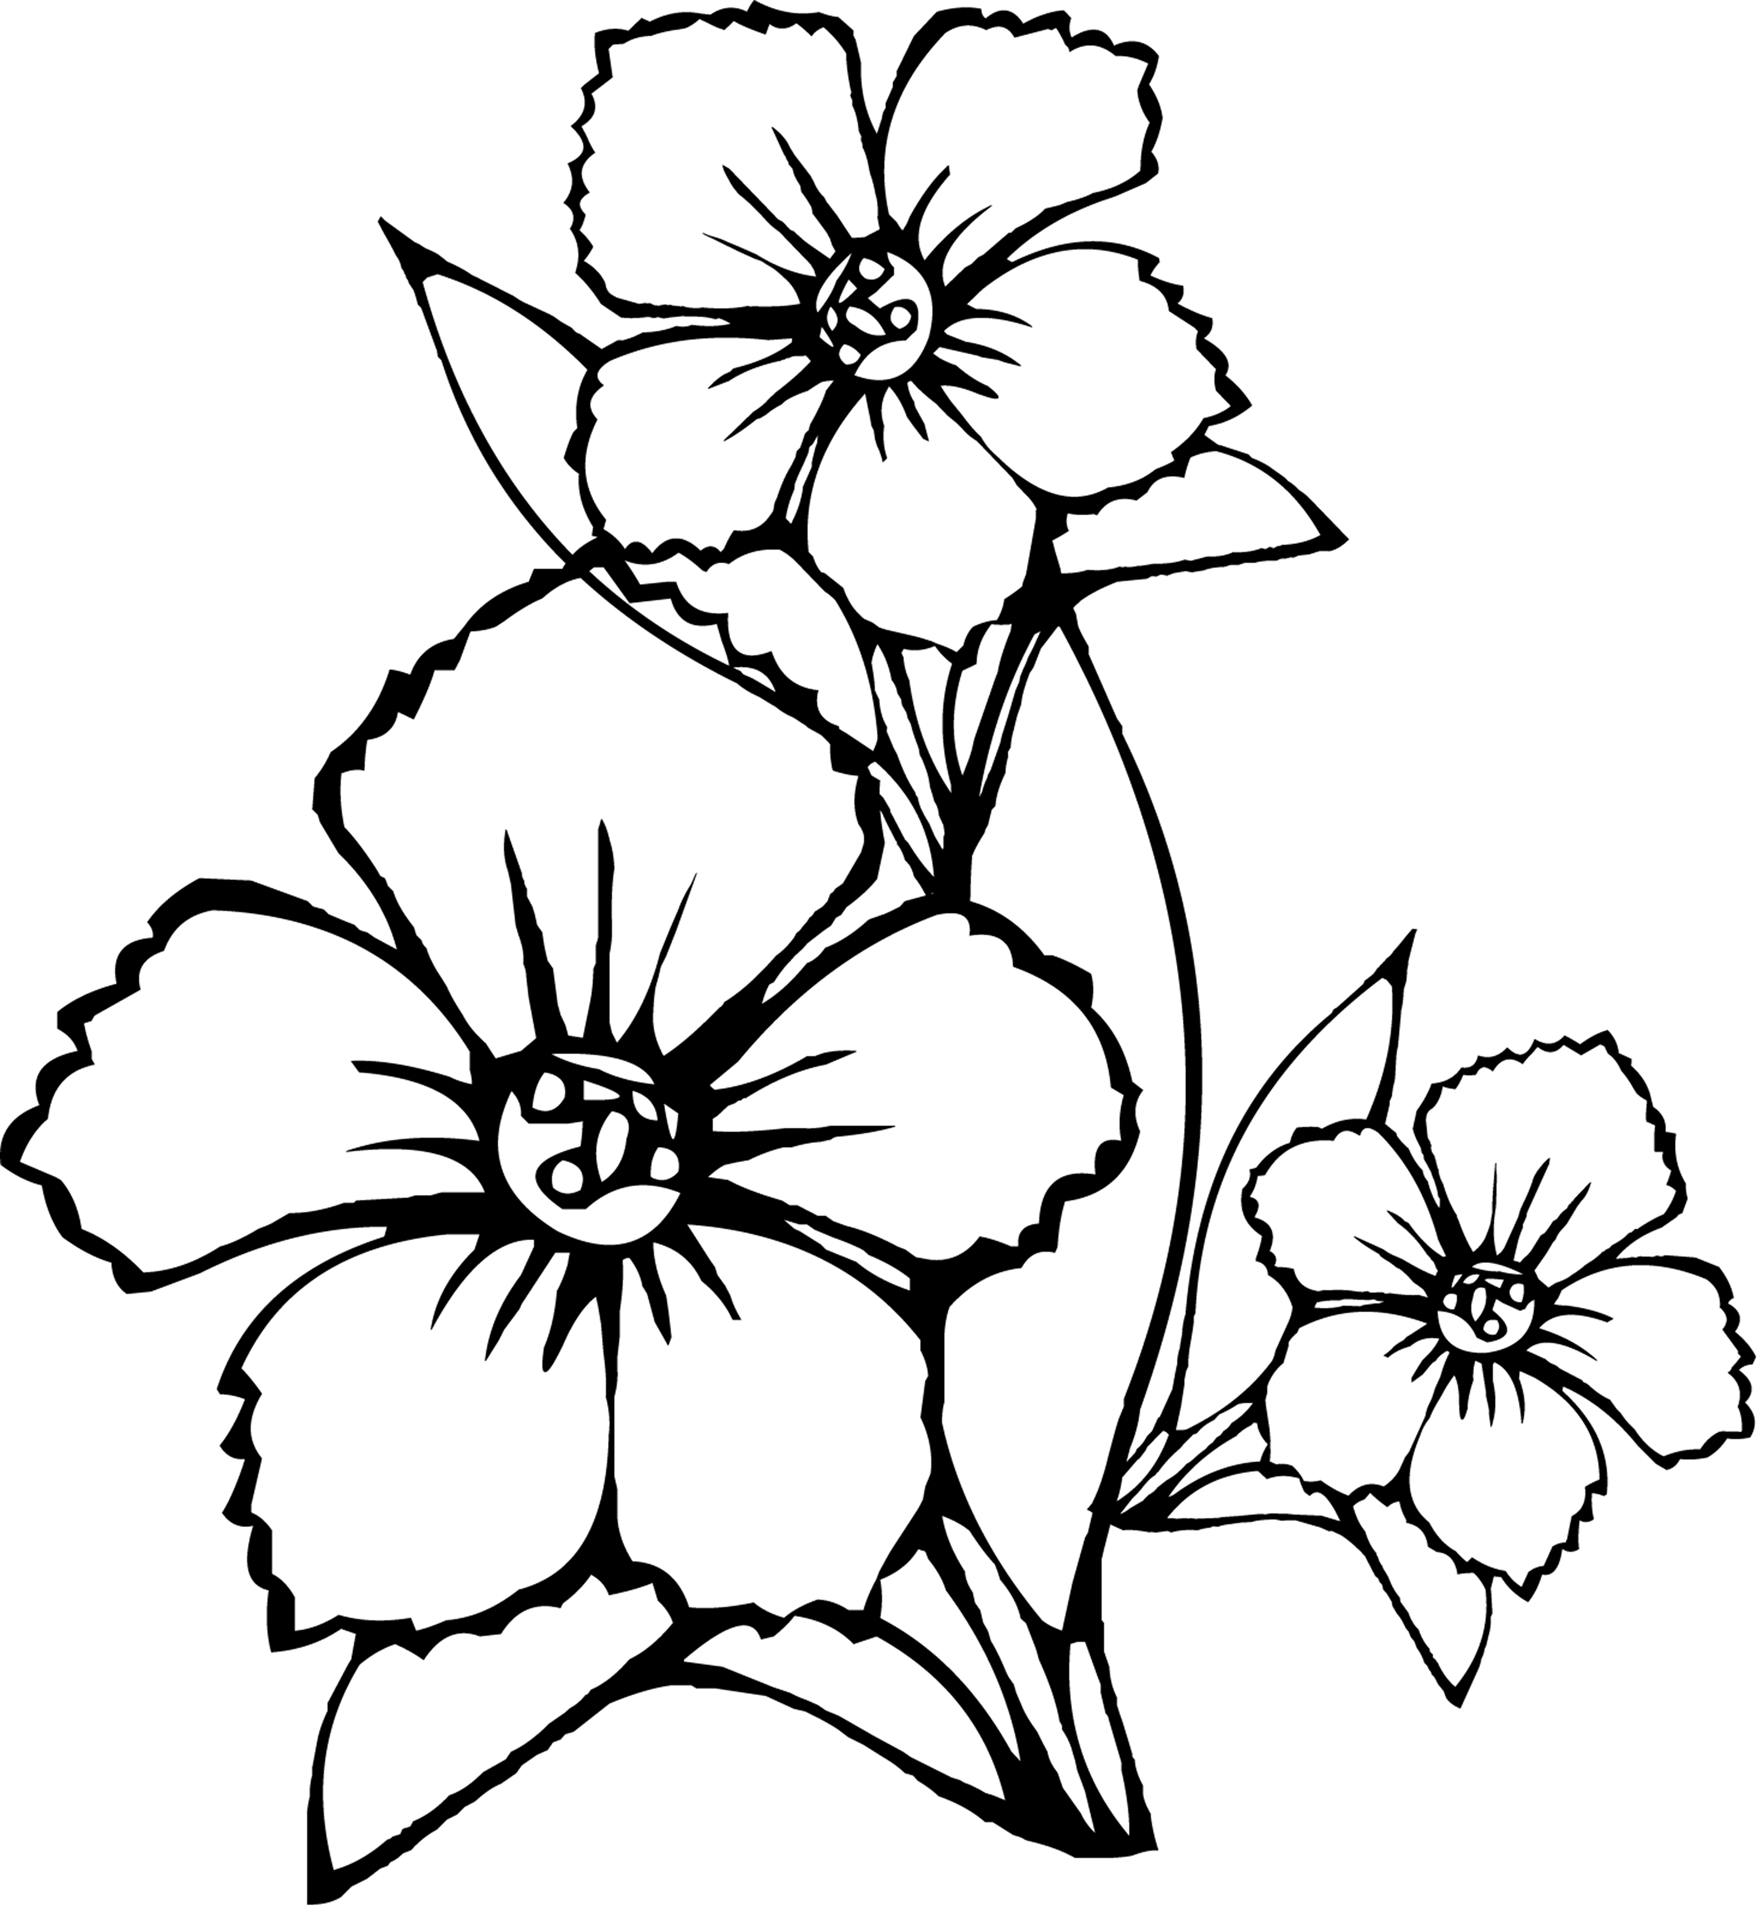 Free Printable Flower Coloring Pages For Kids Best Coloring Pages For Kids Black and white pictures of flowers to print free. free printable flower coloring pages